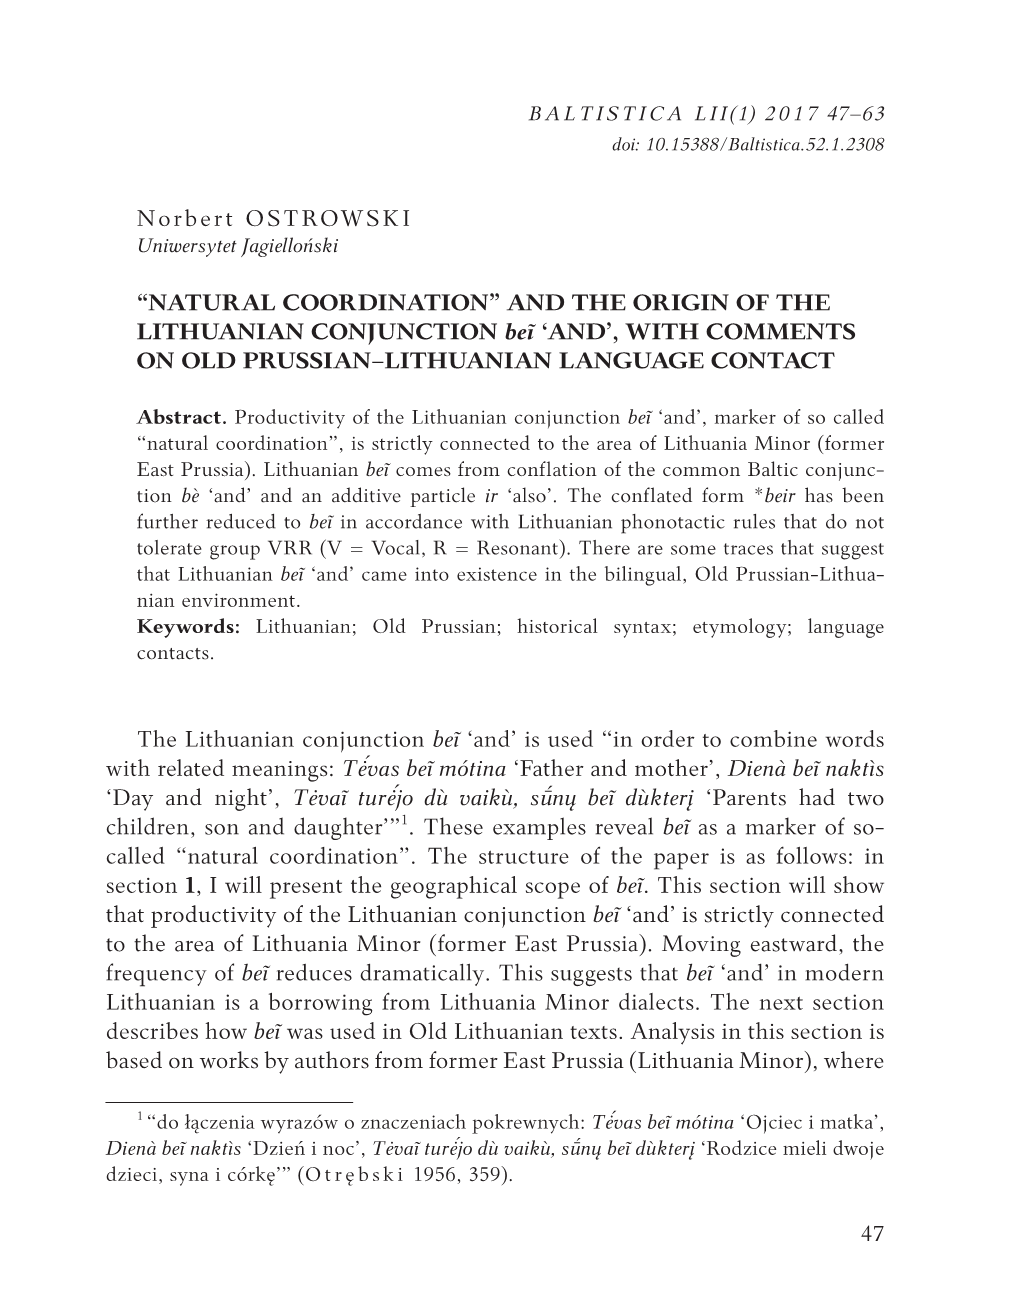 “NATURAL COORDINATION” and the ORIGIN of the LITHUANIAN CONJUNCTION Beĩ ‘AND’, with COMMENTS on OLD PRUSSIAN–LITHUANIAN LANGUAGE CONTACT